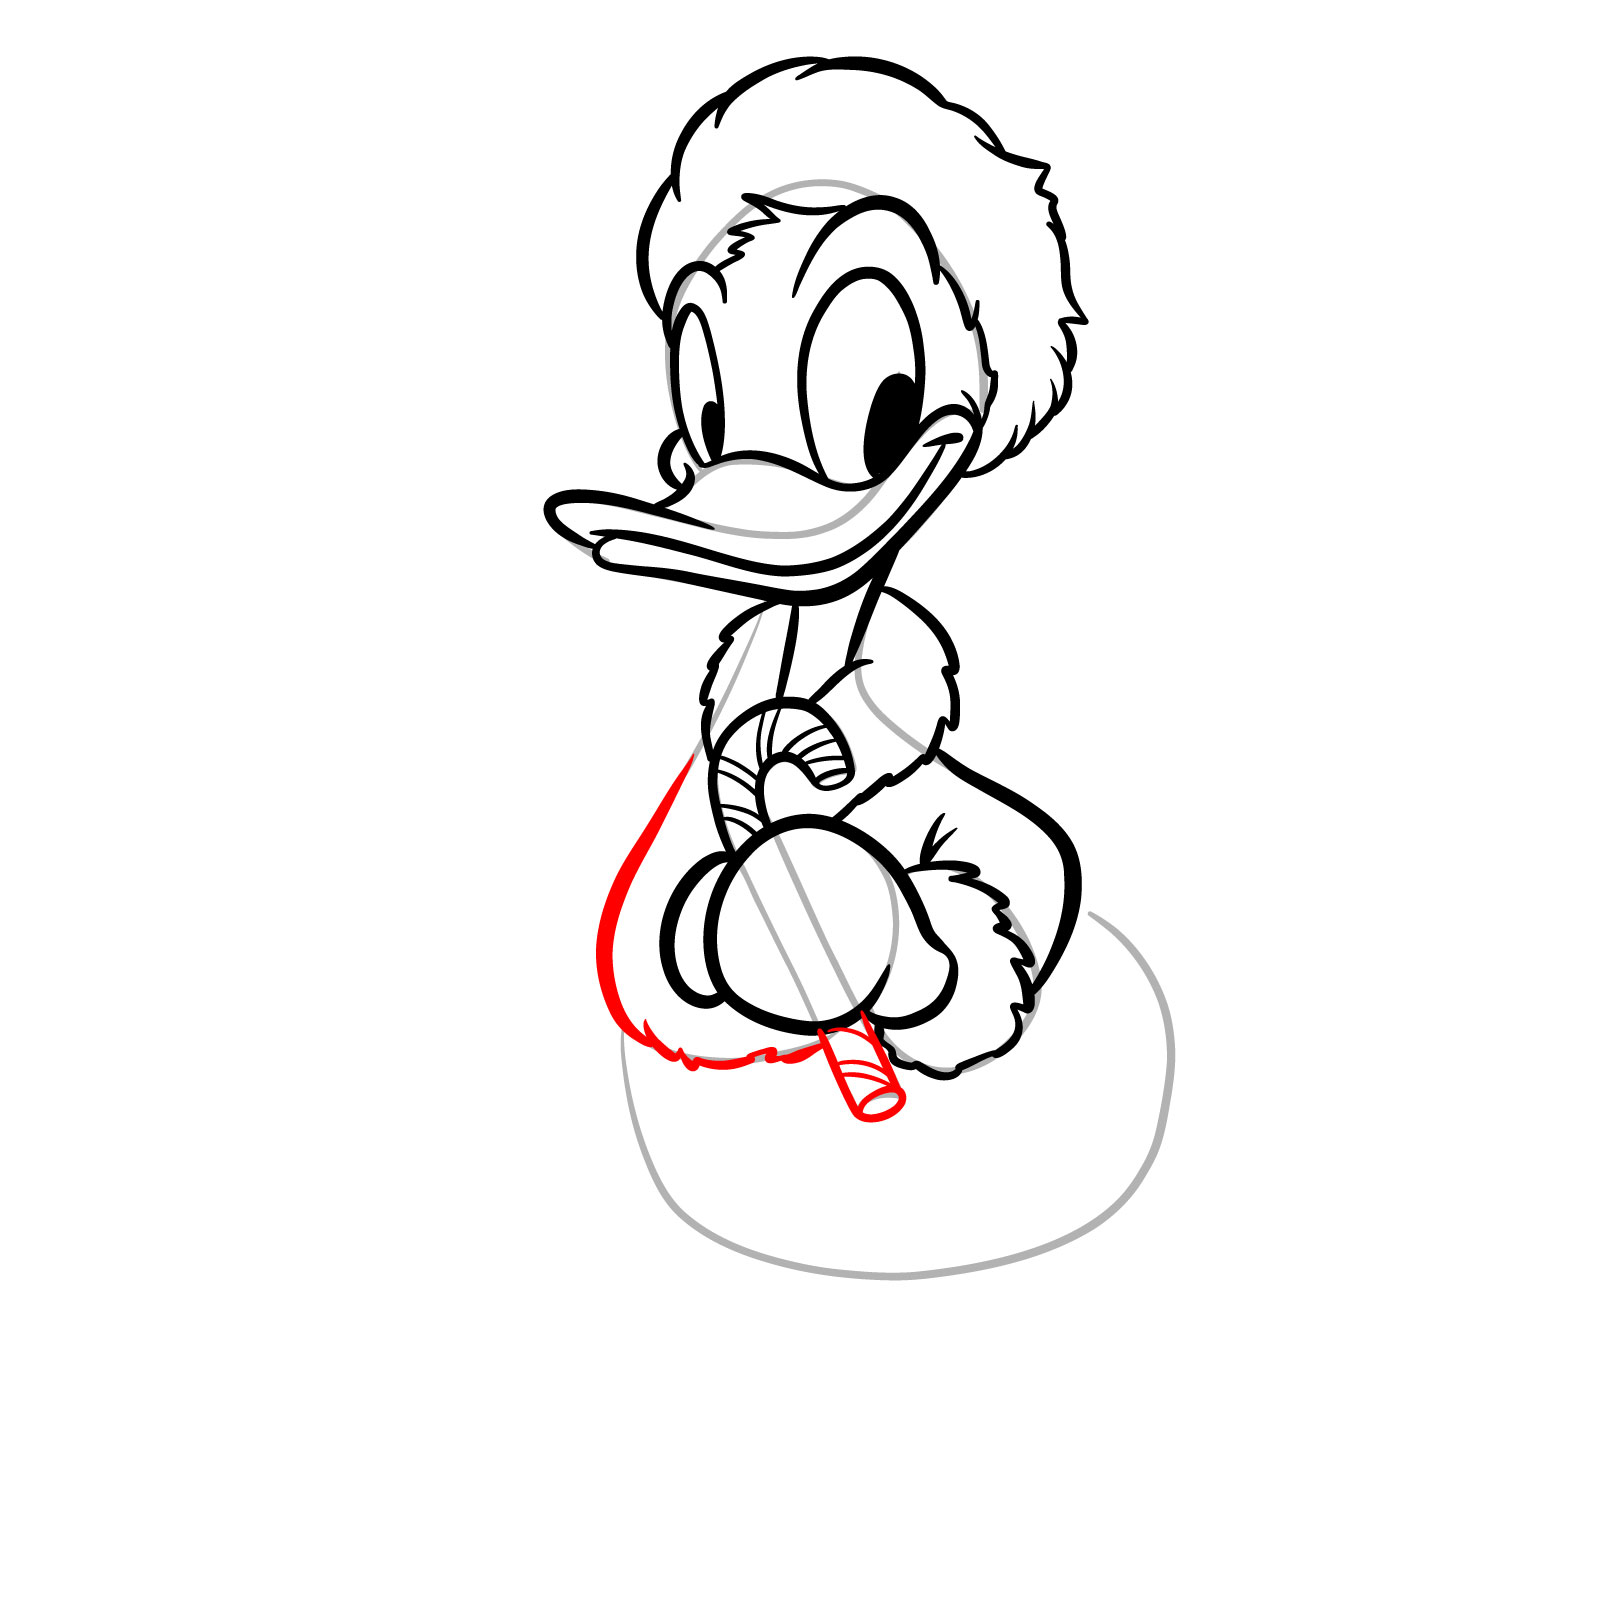 How to Draw Christmas Donald Duck - step 16